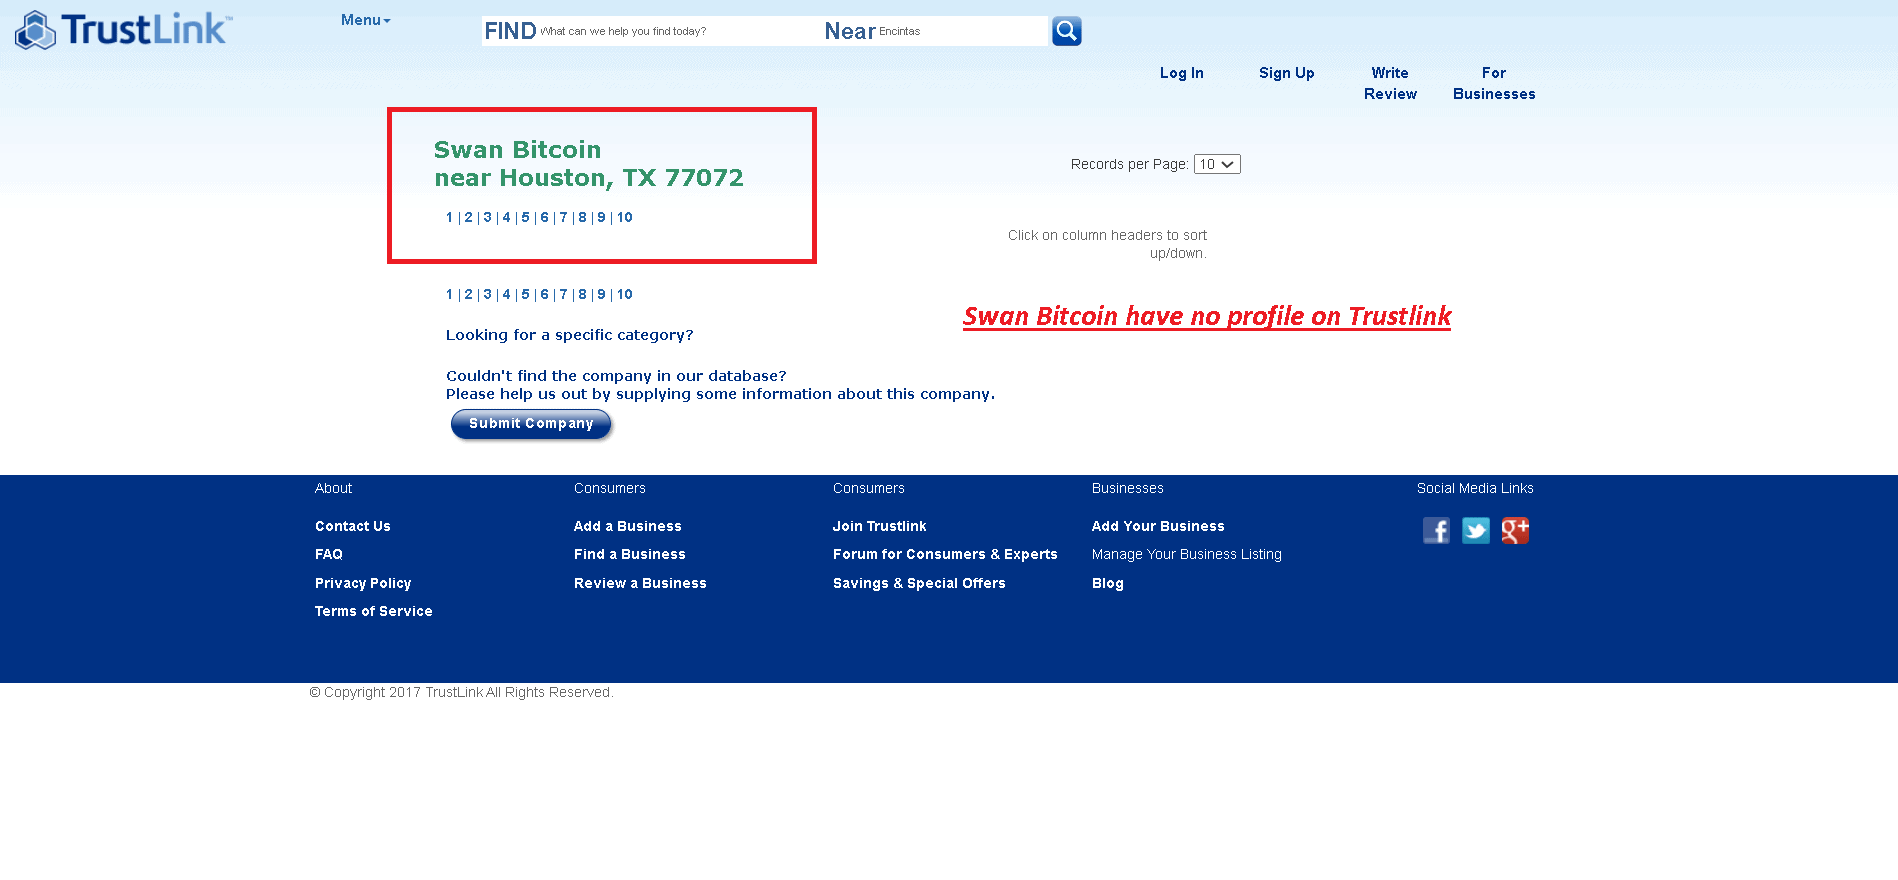 Swan Bitcoin have no profile and customer reviews on Trustlink